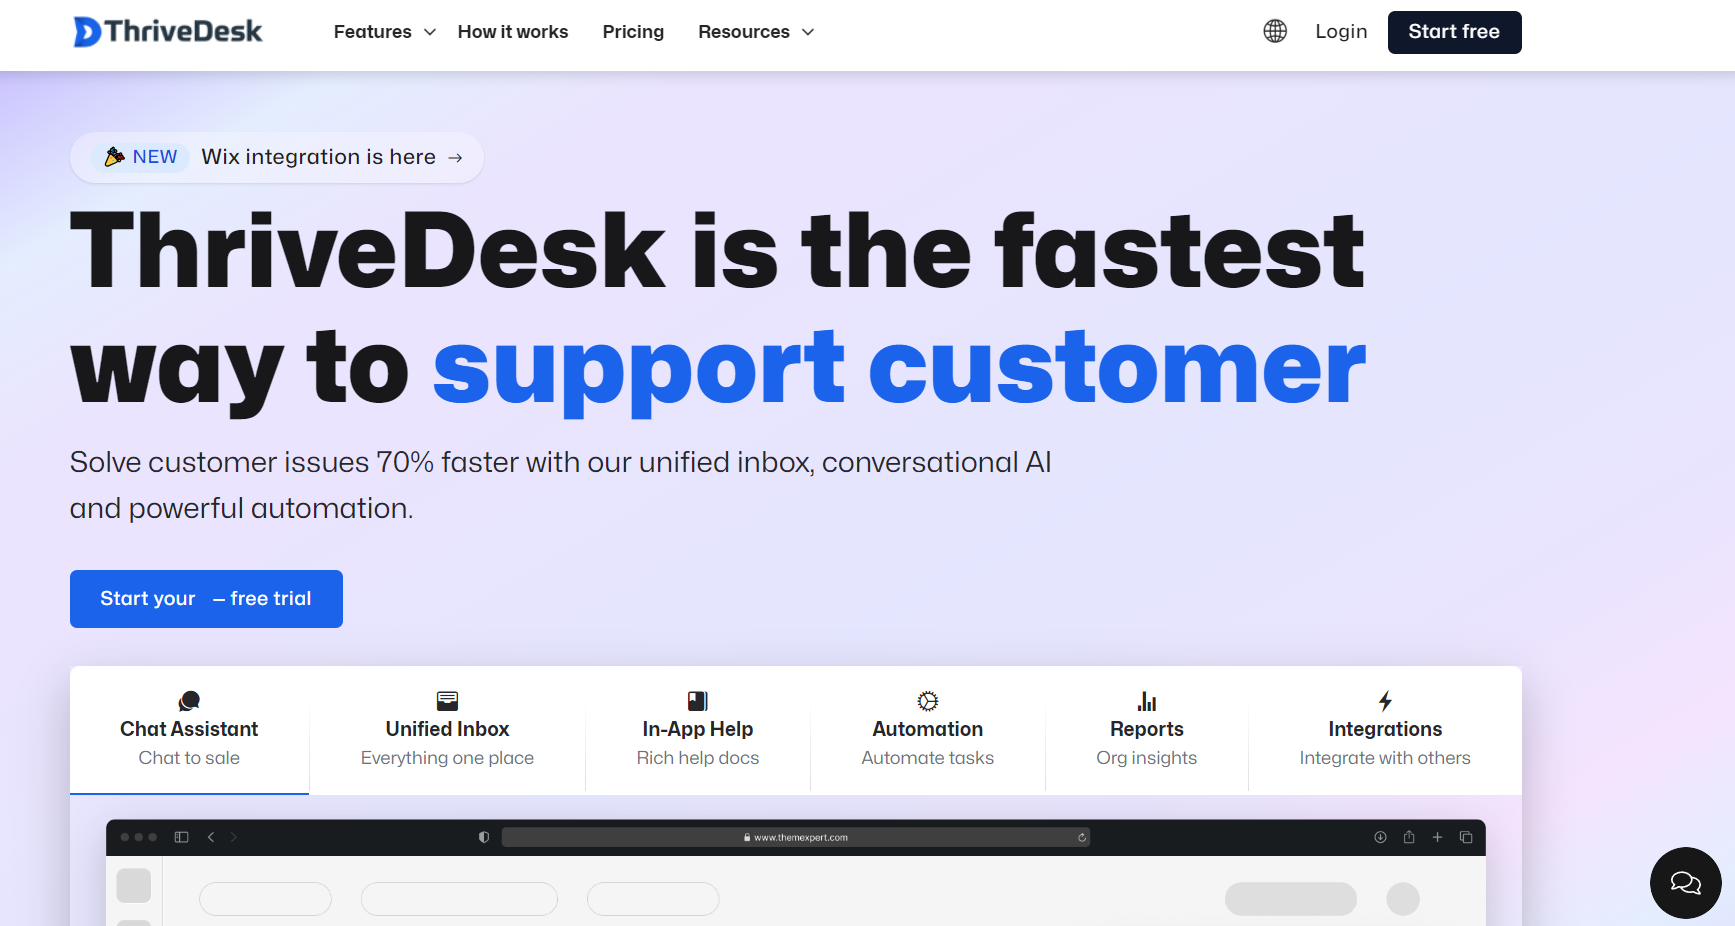 ThriveDesk: Customer Support solution for Startups and SMBs